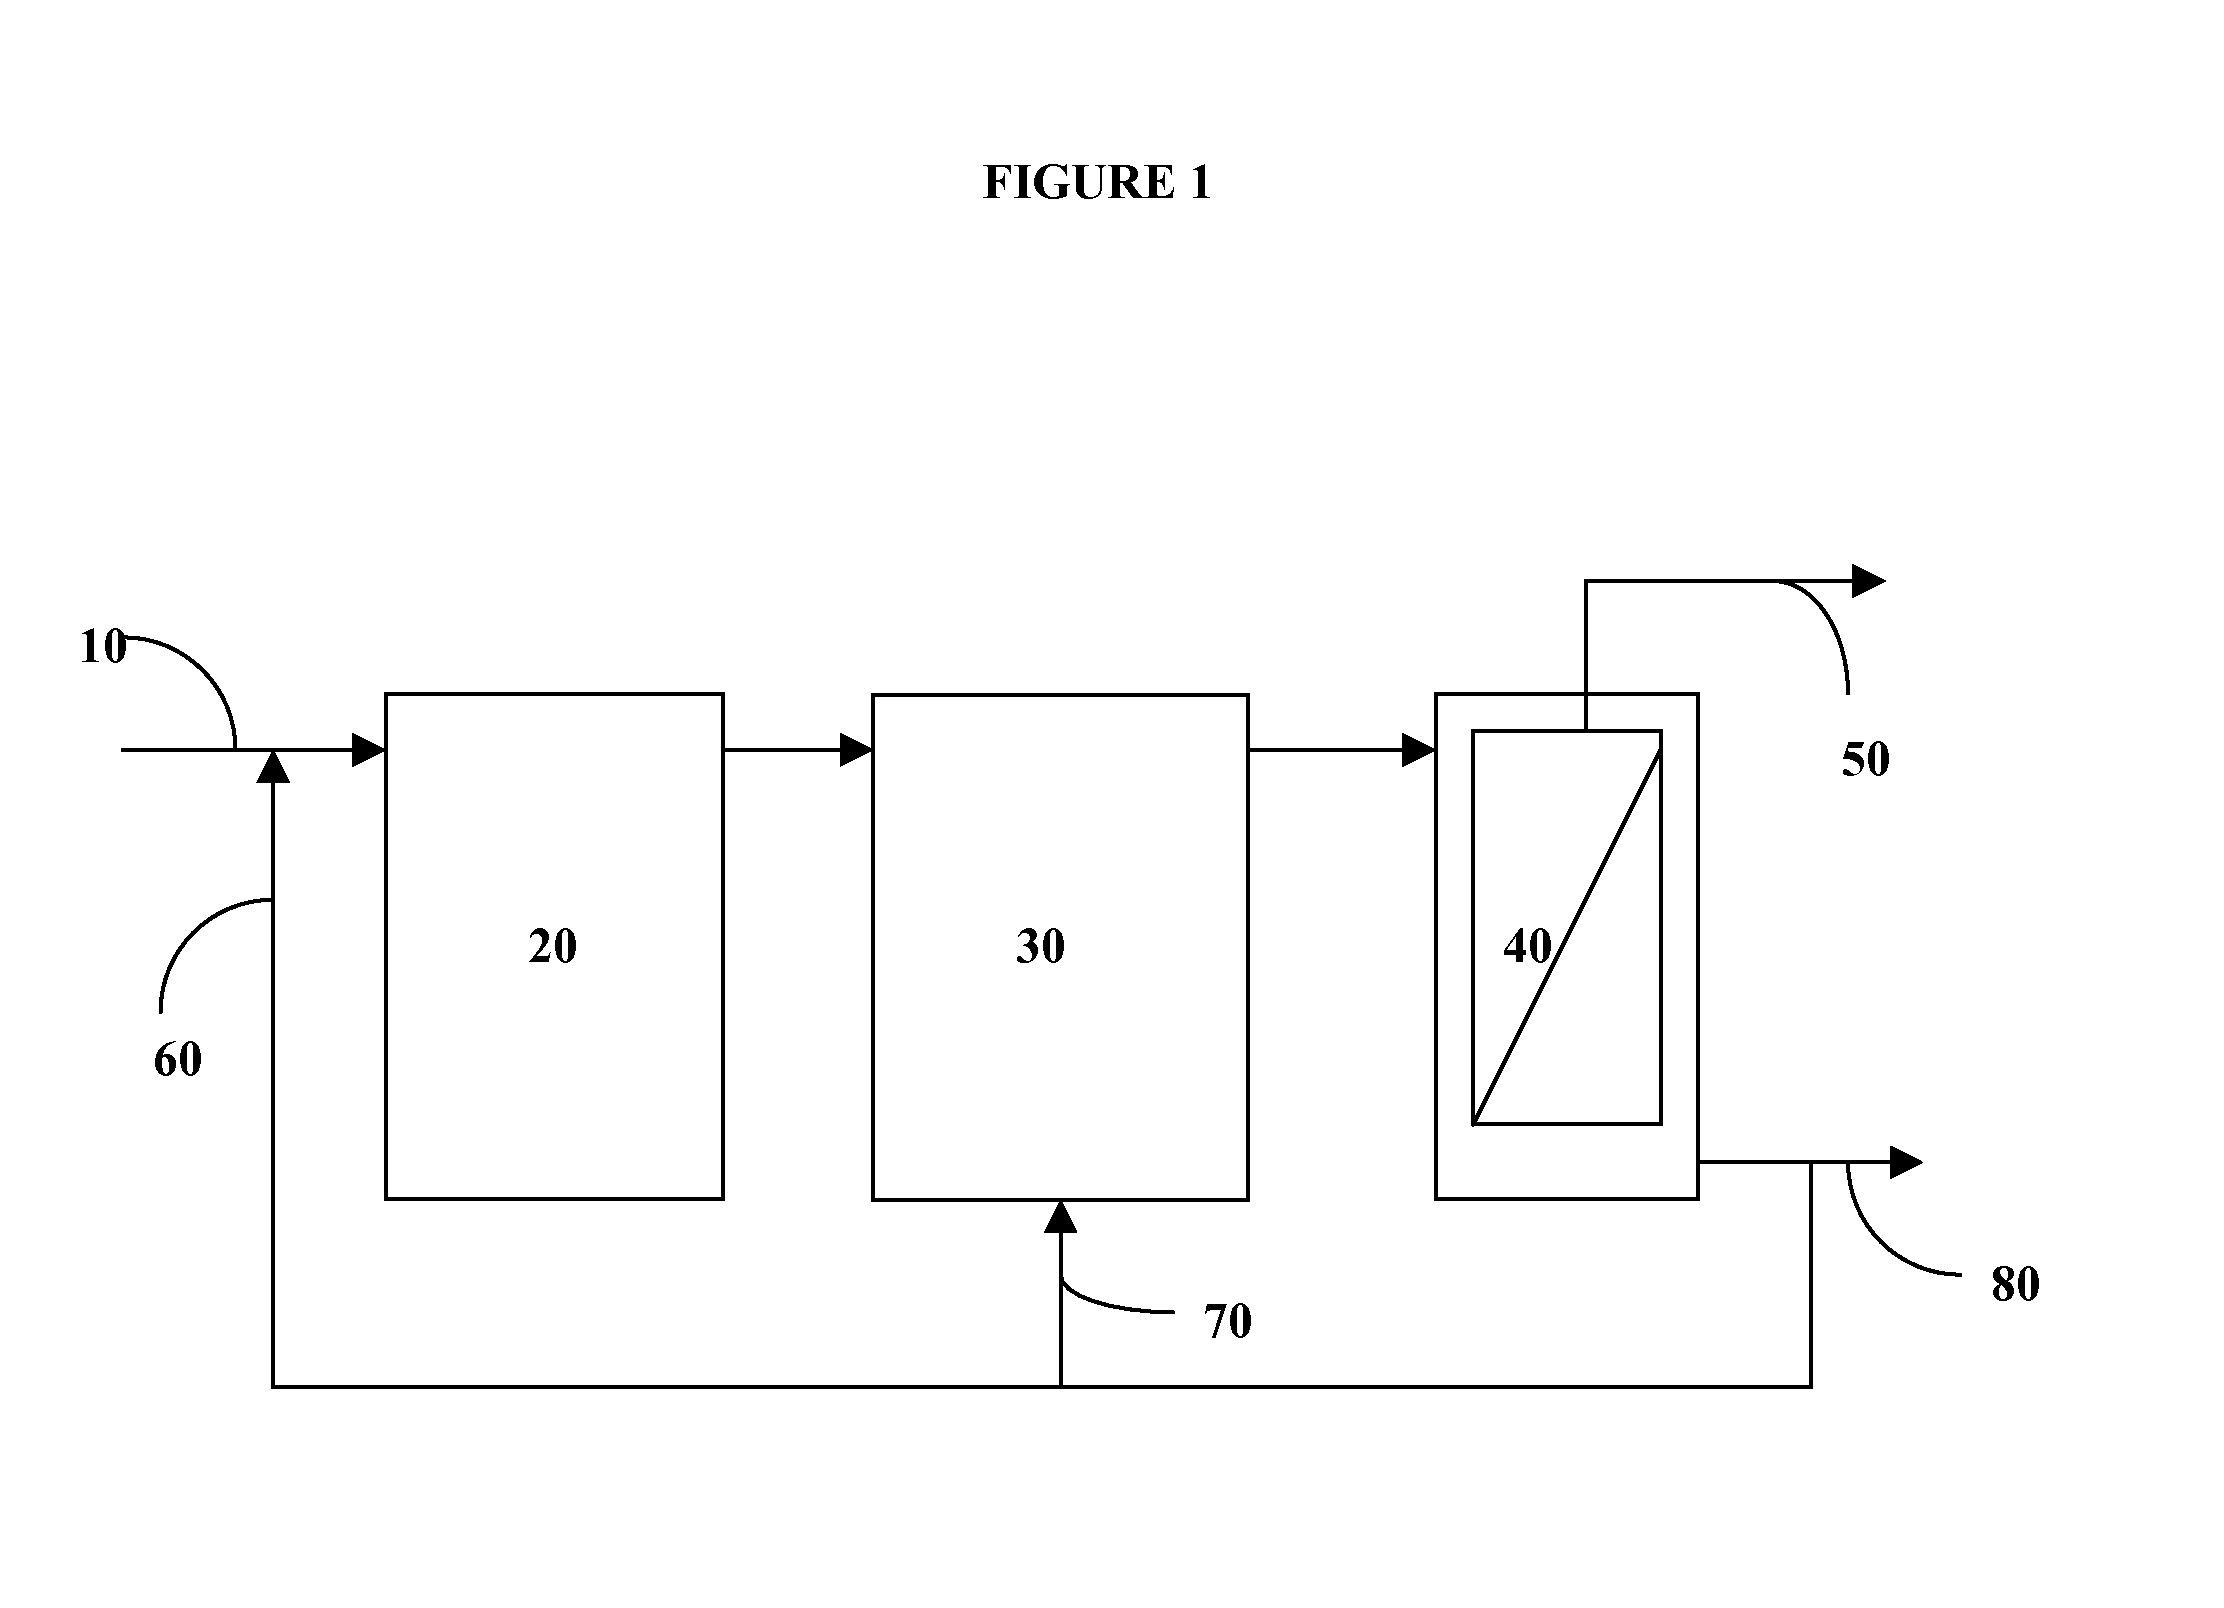 Method of conditioning mixed liquor using a tannin containing polymer